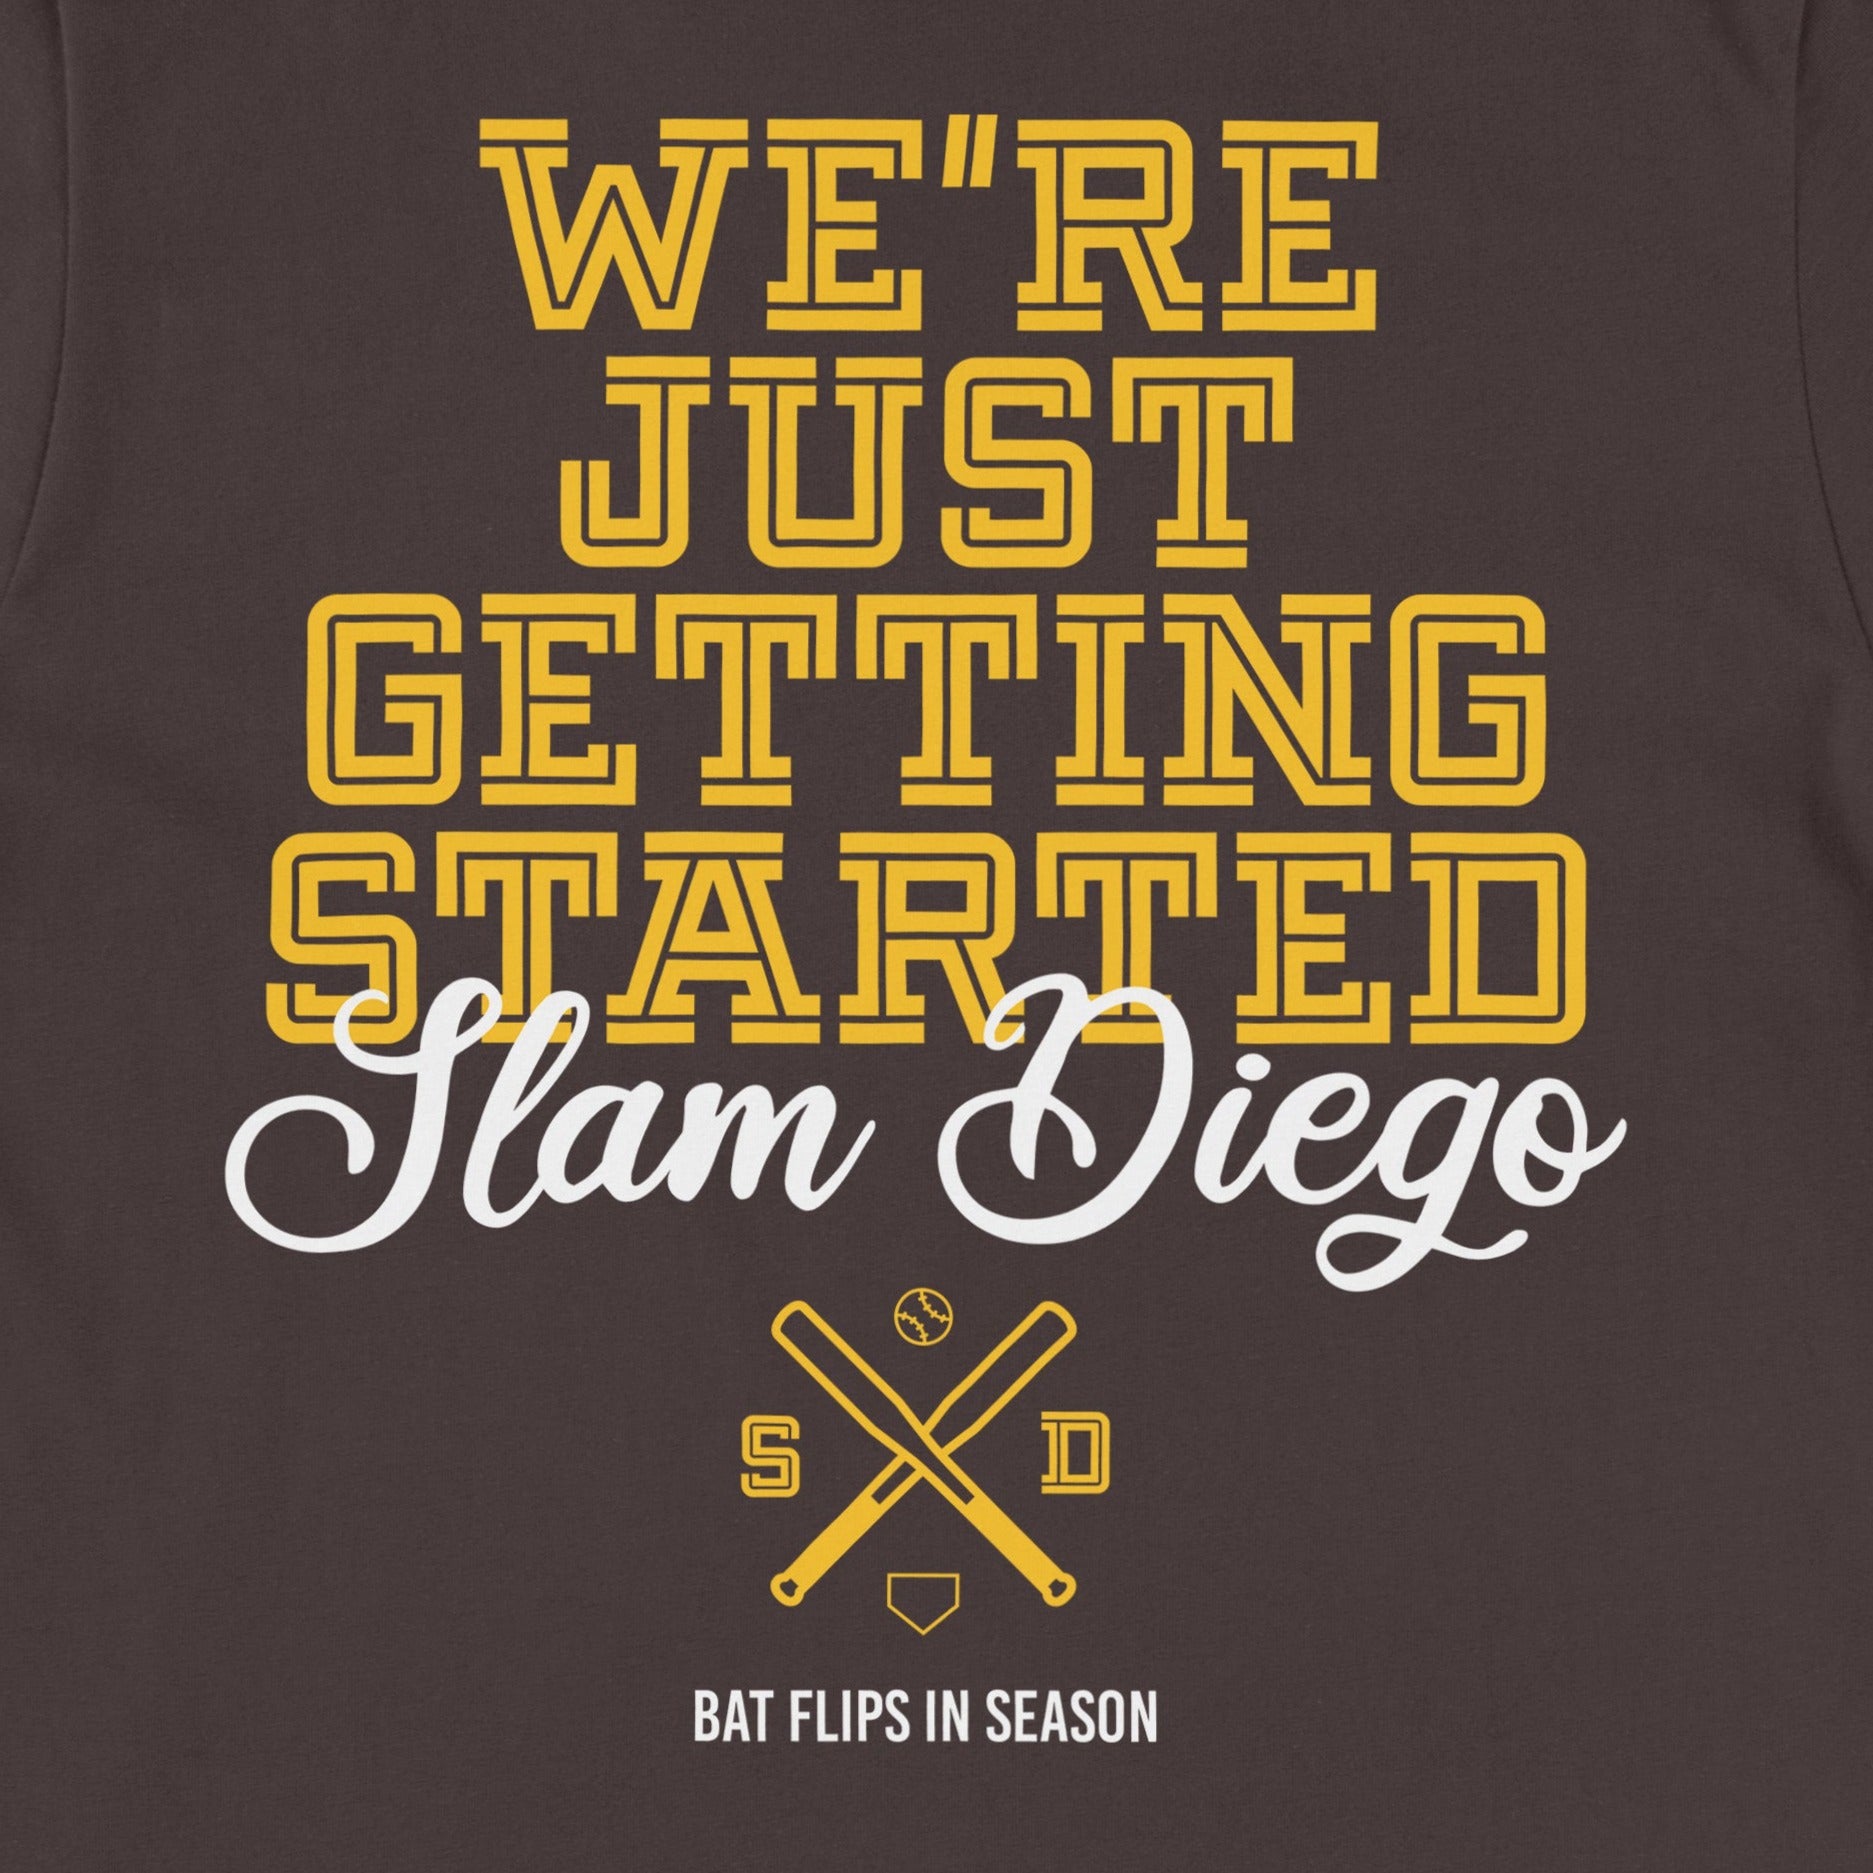 LFGSD. Slam Diego high quality adult unisex t shirt  - We're Just Getting Started